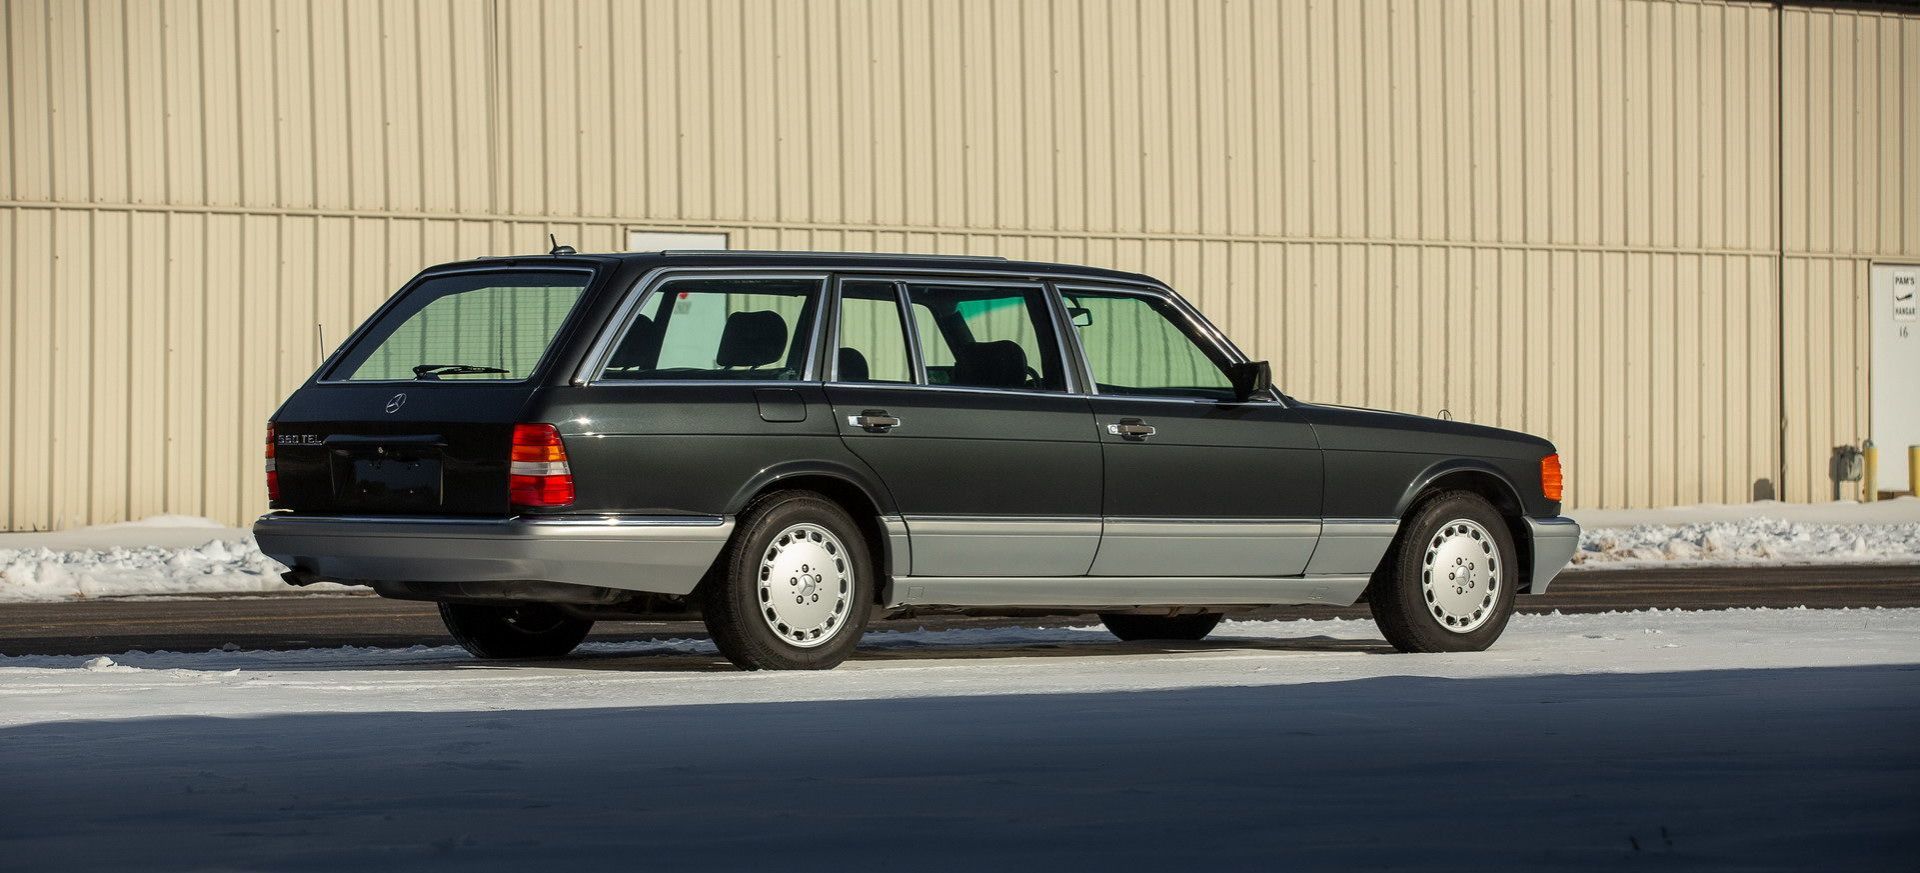 This is the familiar S-Class that Mercedes never produced